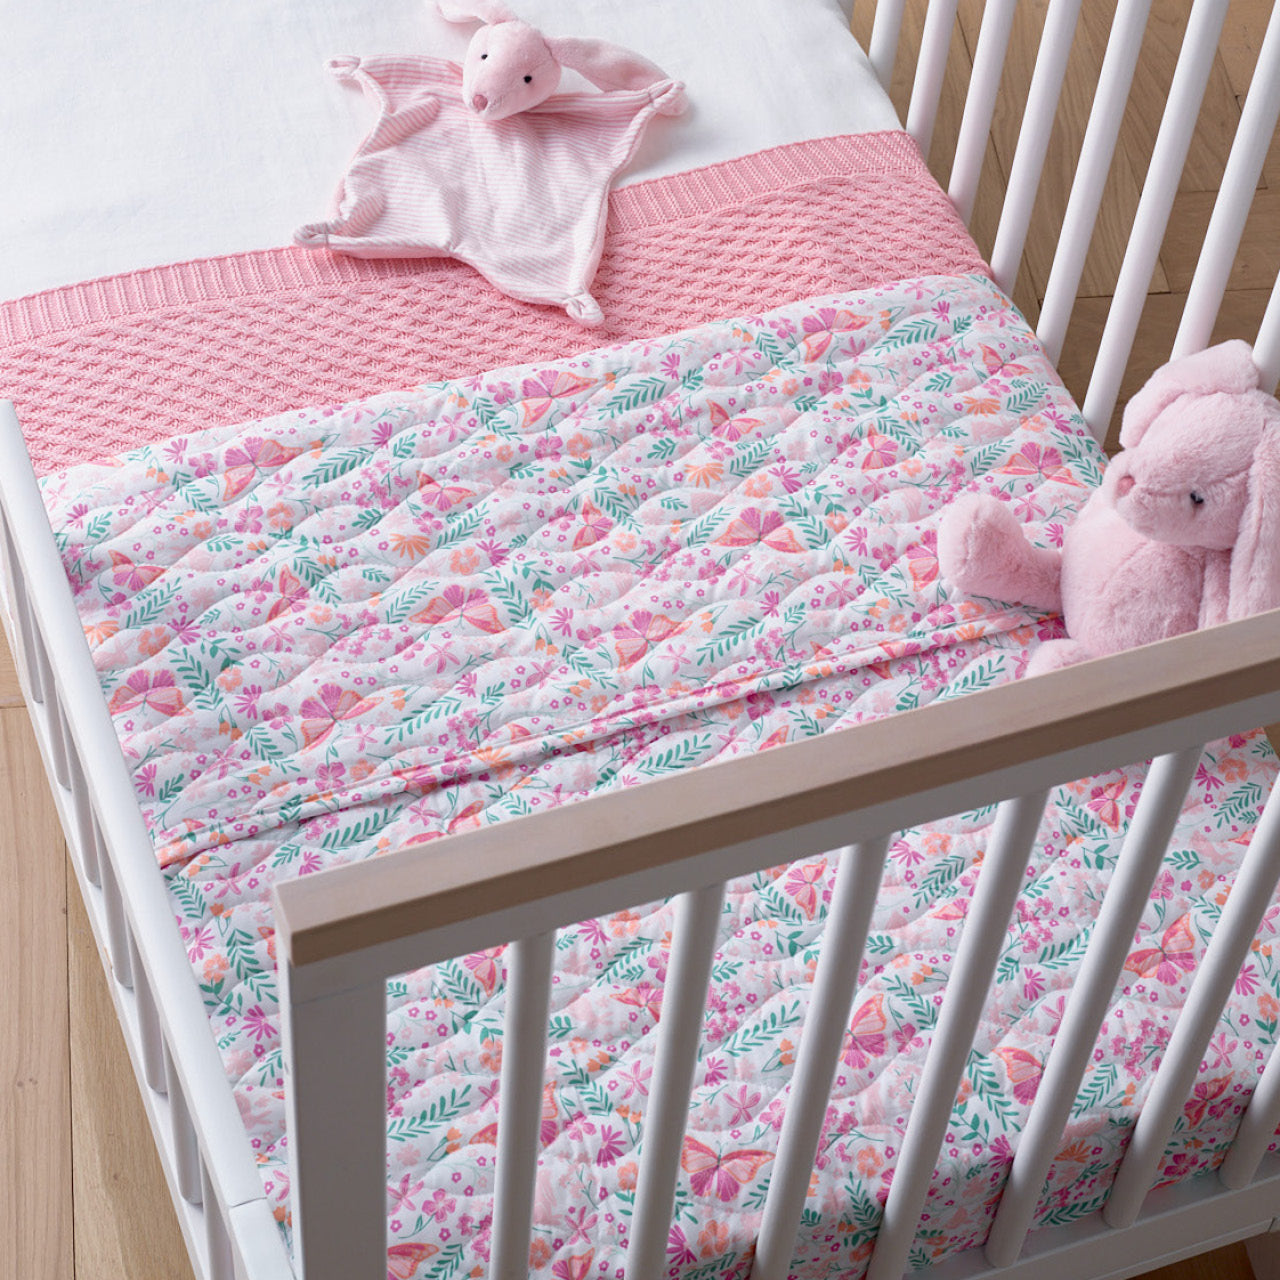 Botanical Cot Comforter on bed with Rattle and Soft Toy